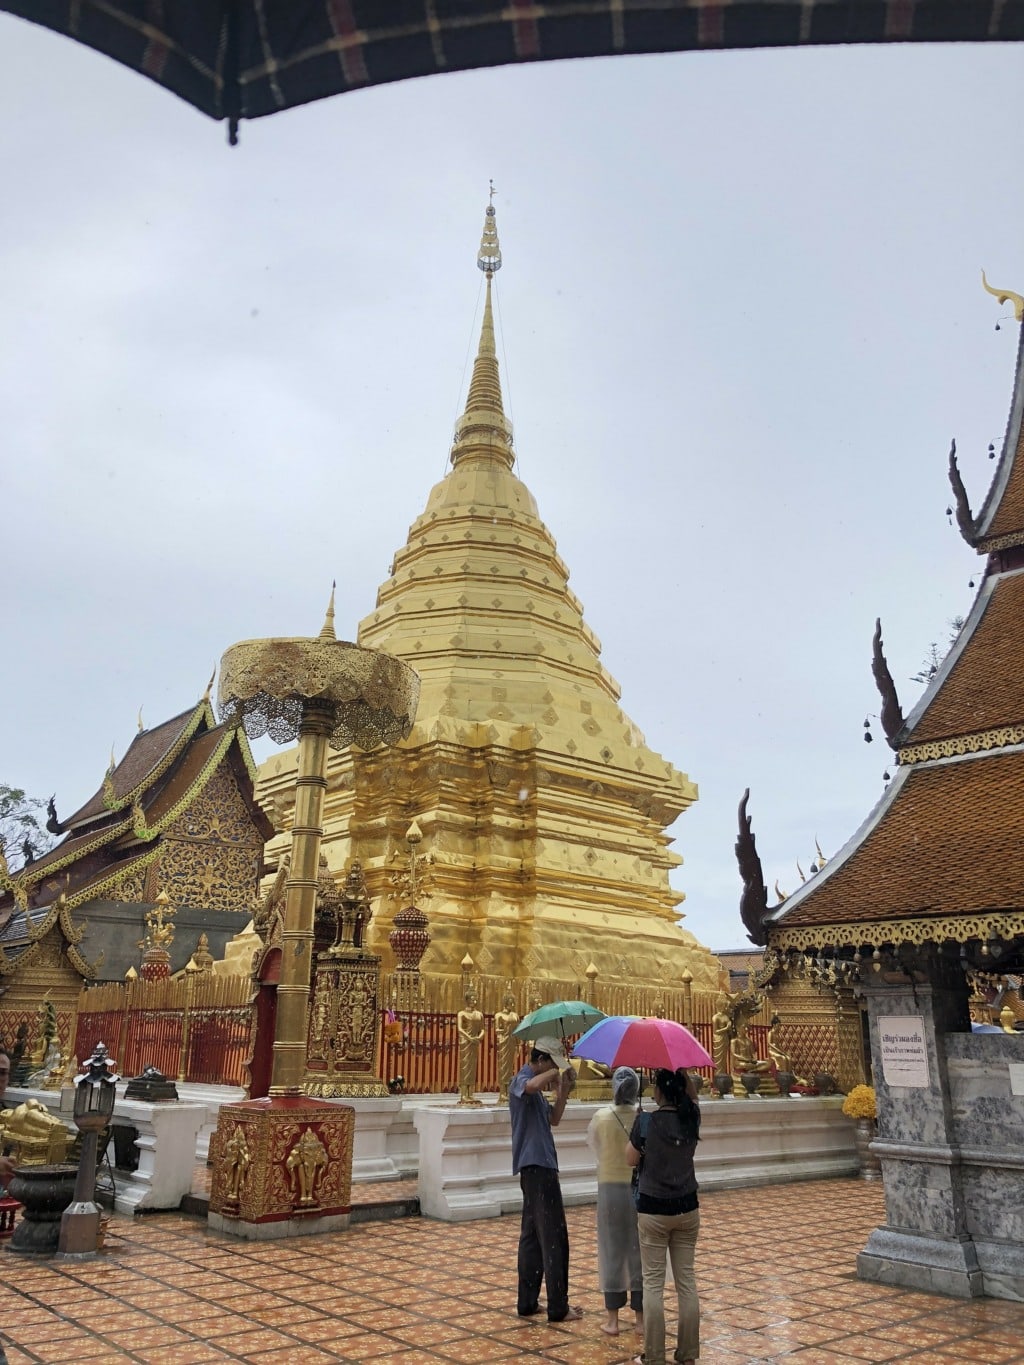 Doi Suthep- relatively uncrowded due to the rains